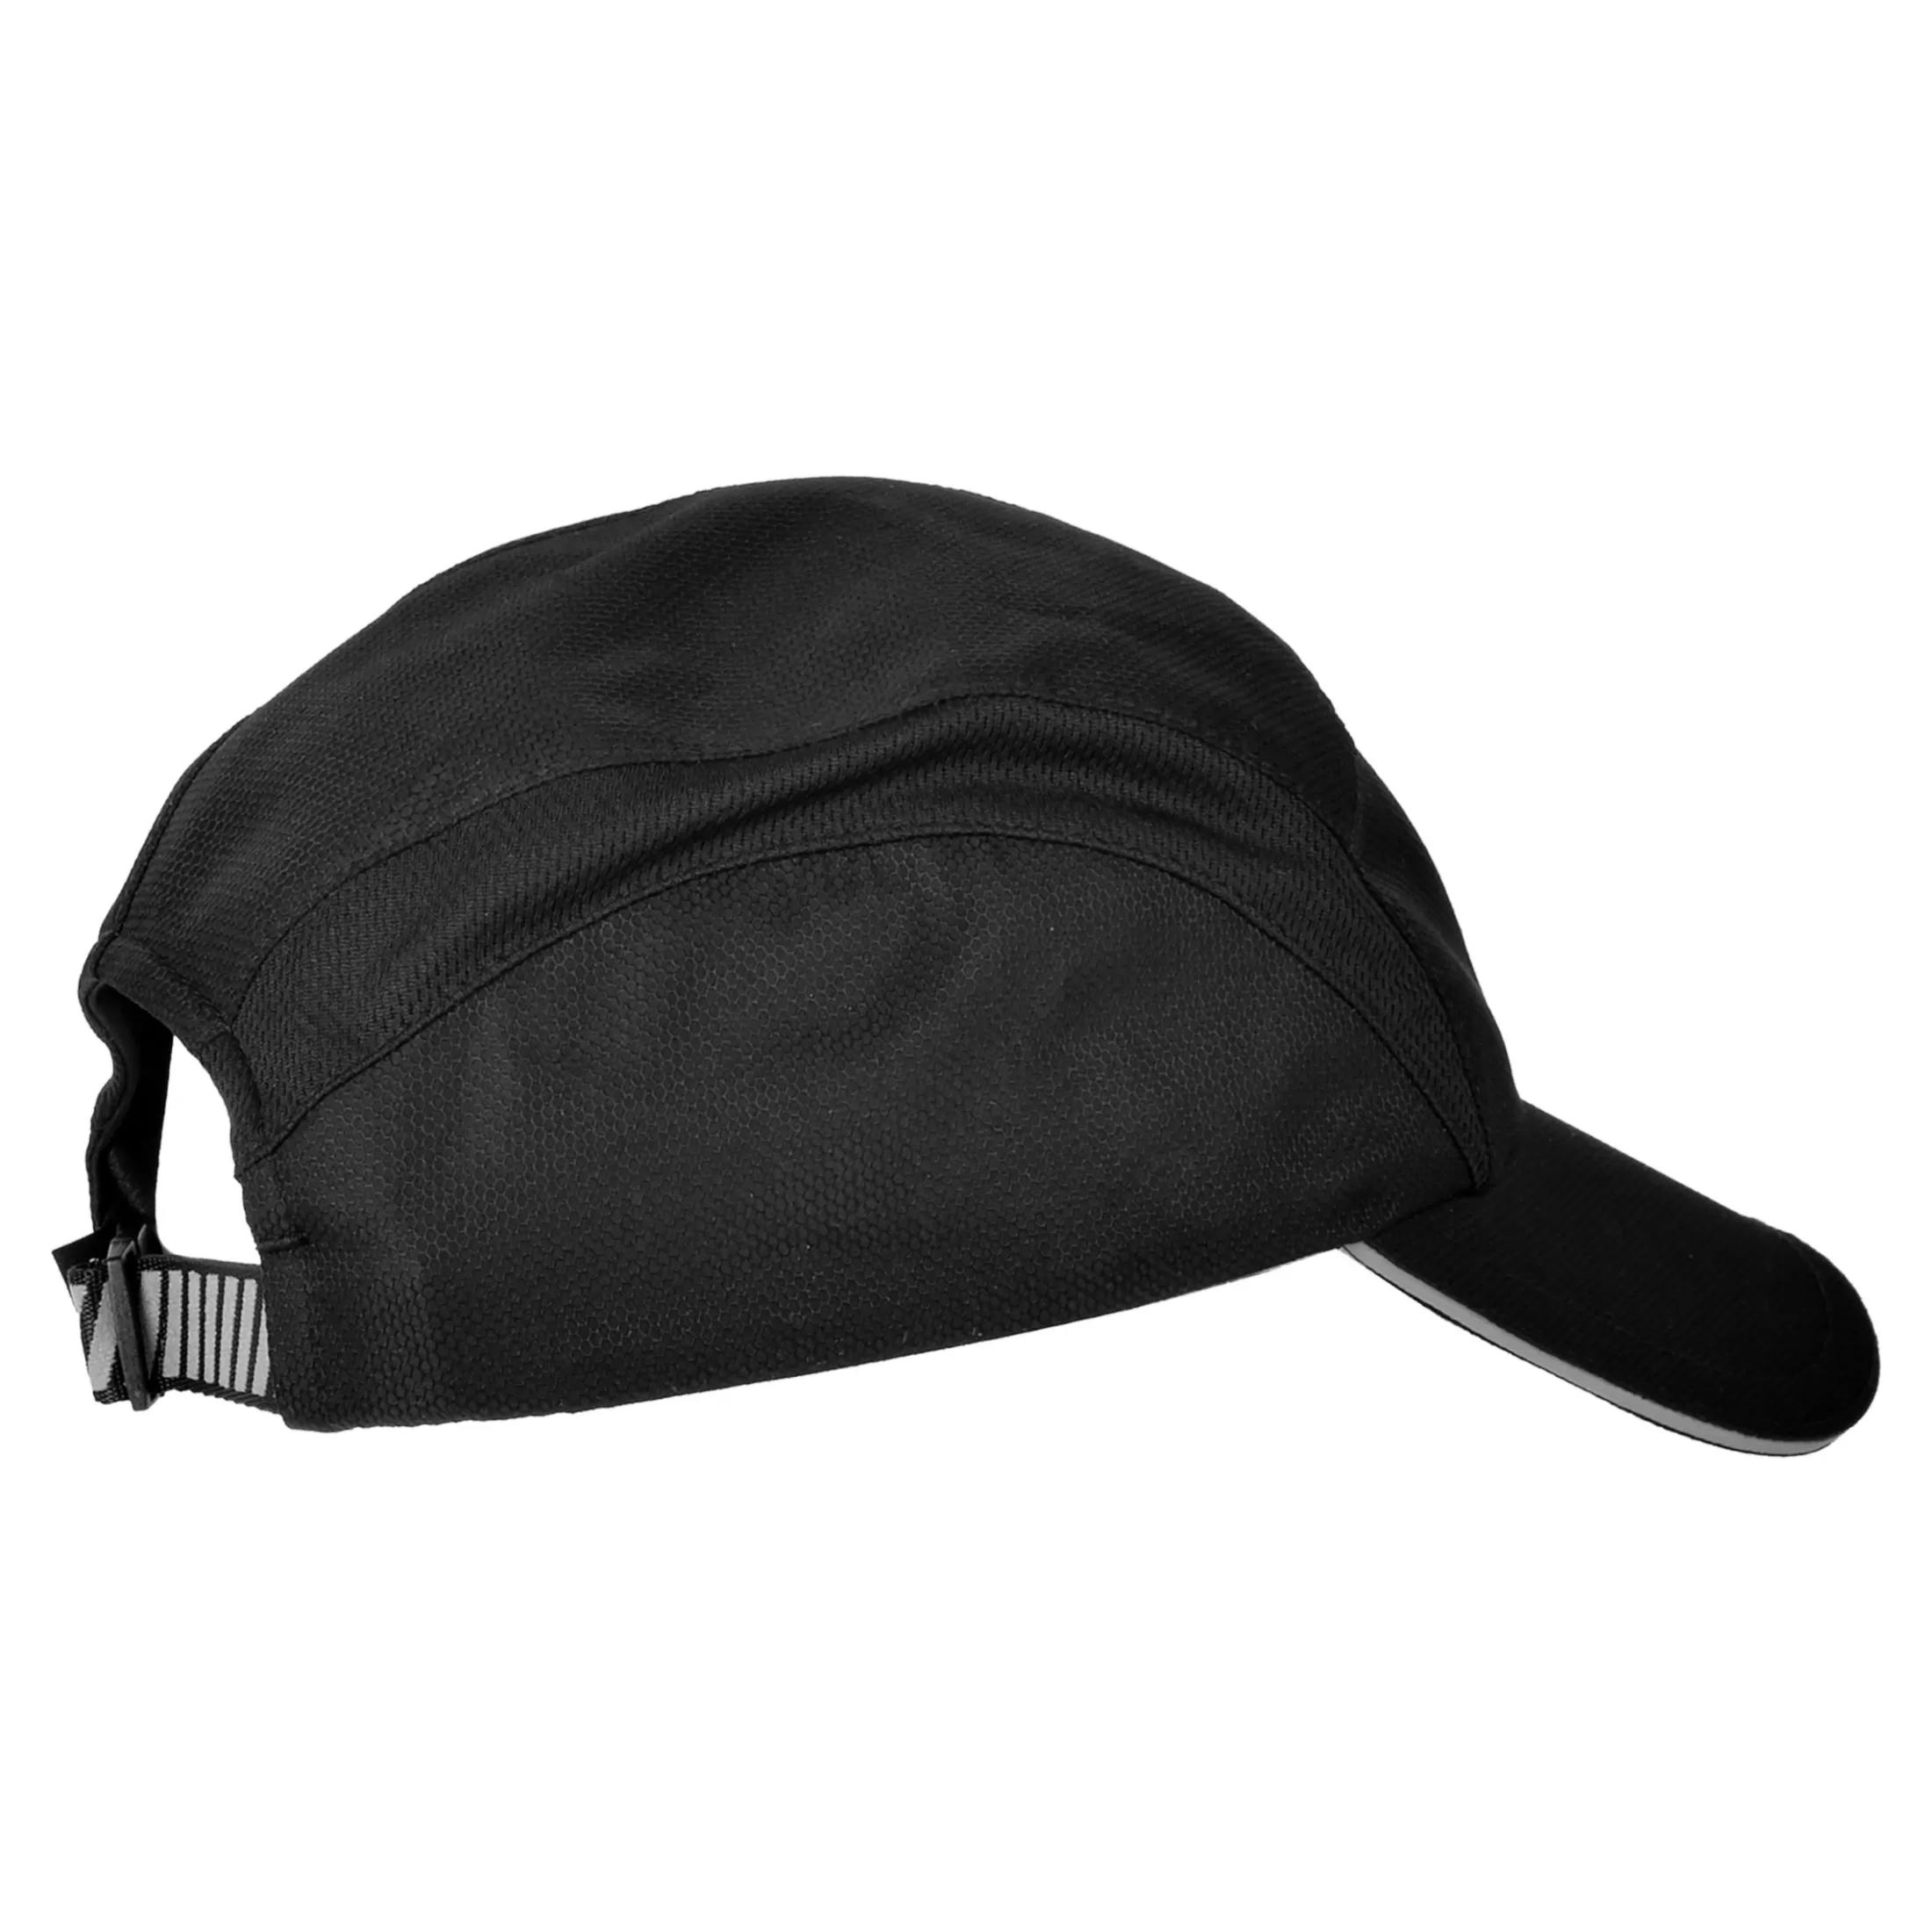 Store Unisex 5 Panel Performance Hat MULHER/HOMEN Chapéus e gorros | All Accessories